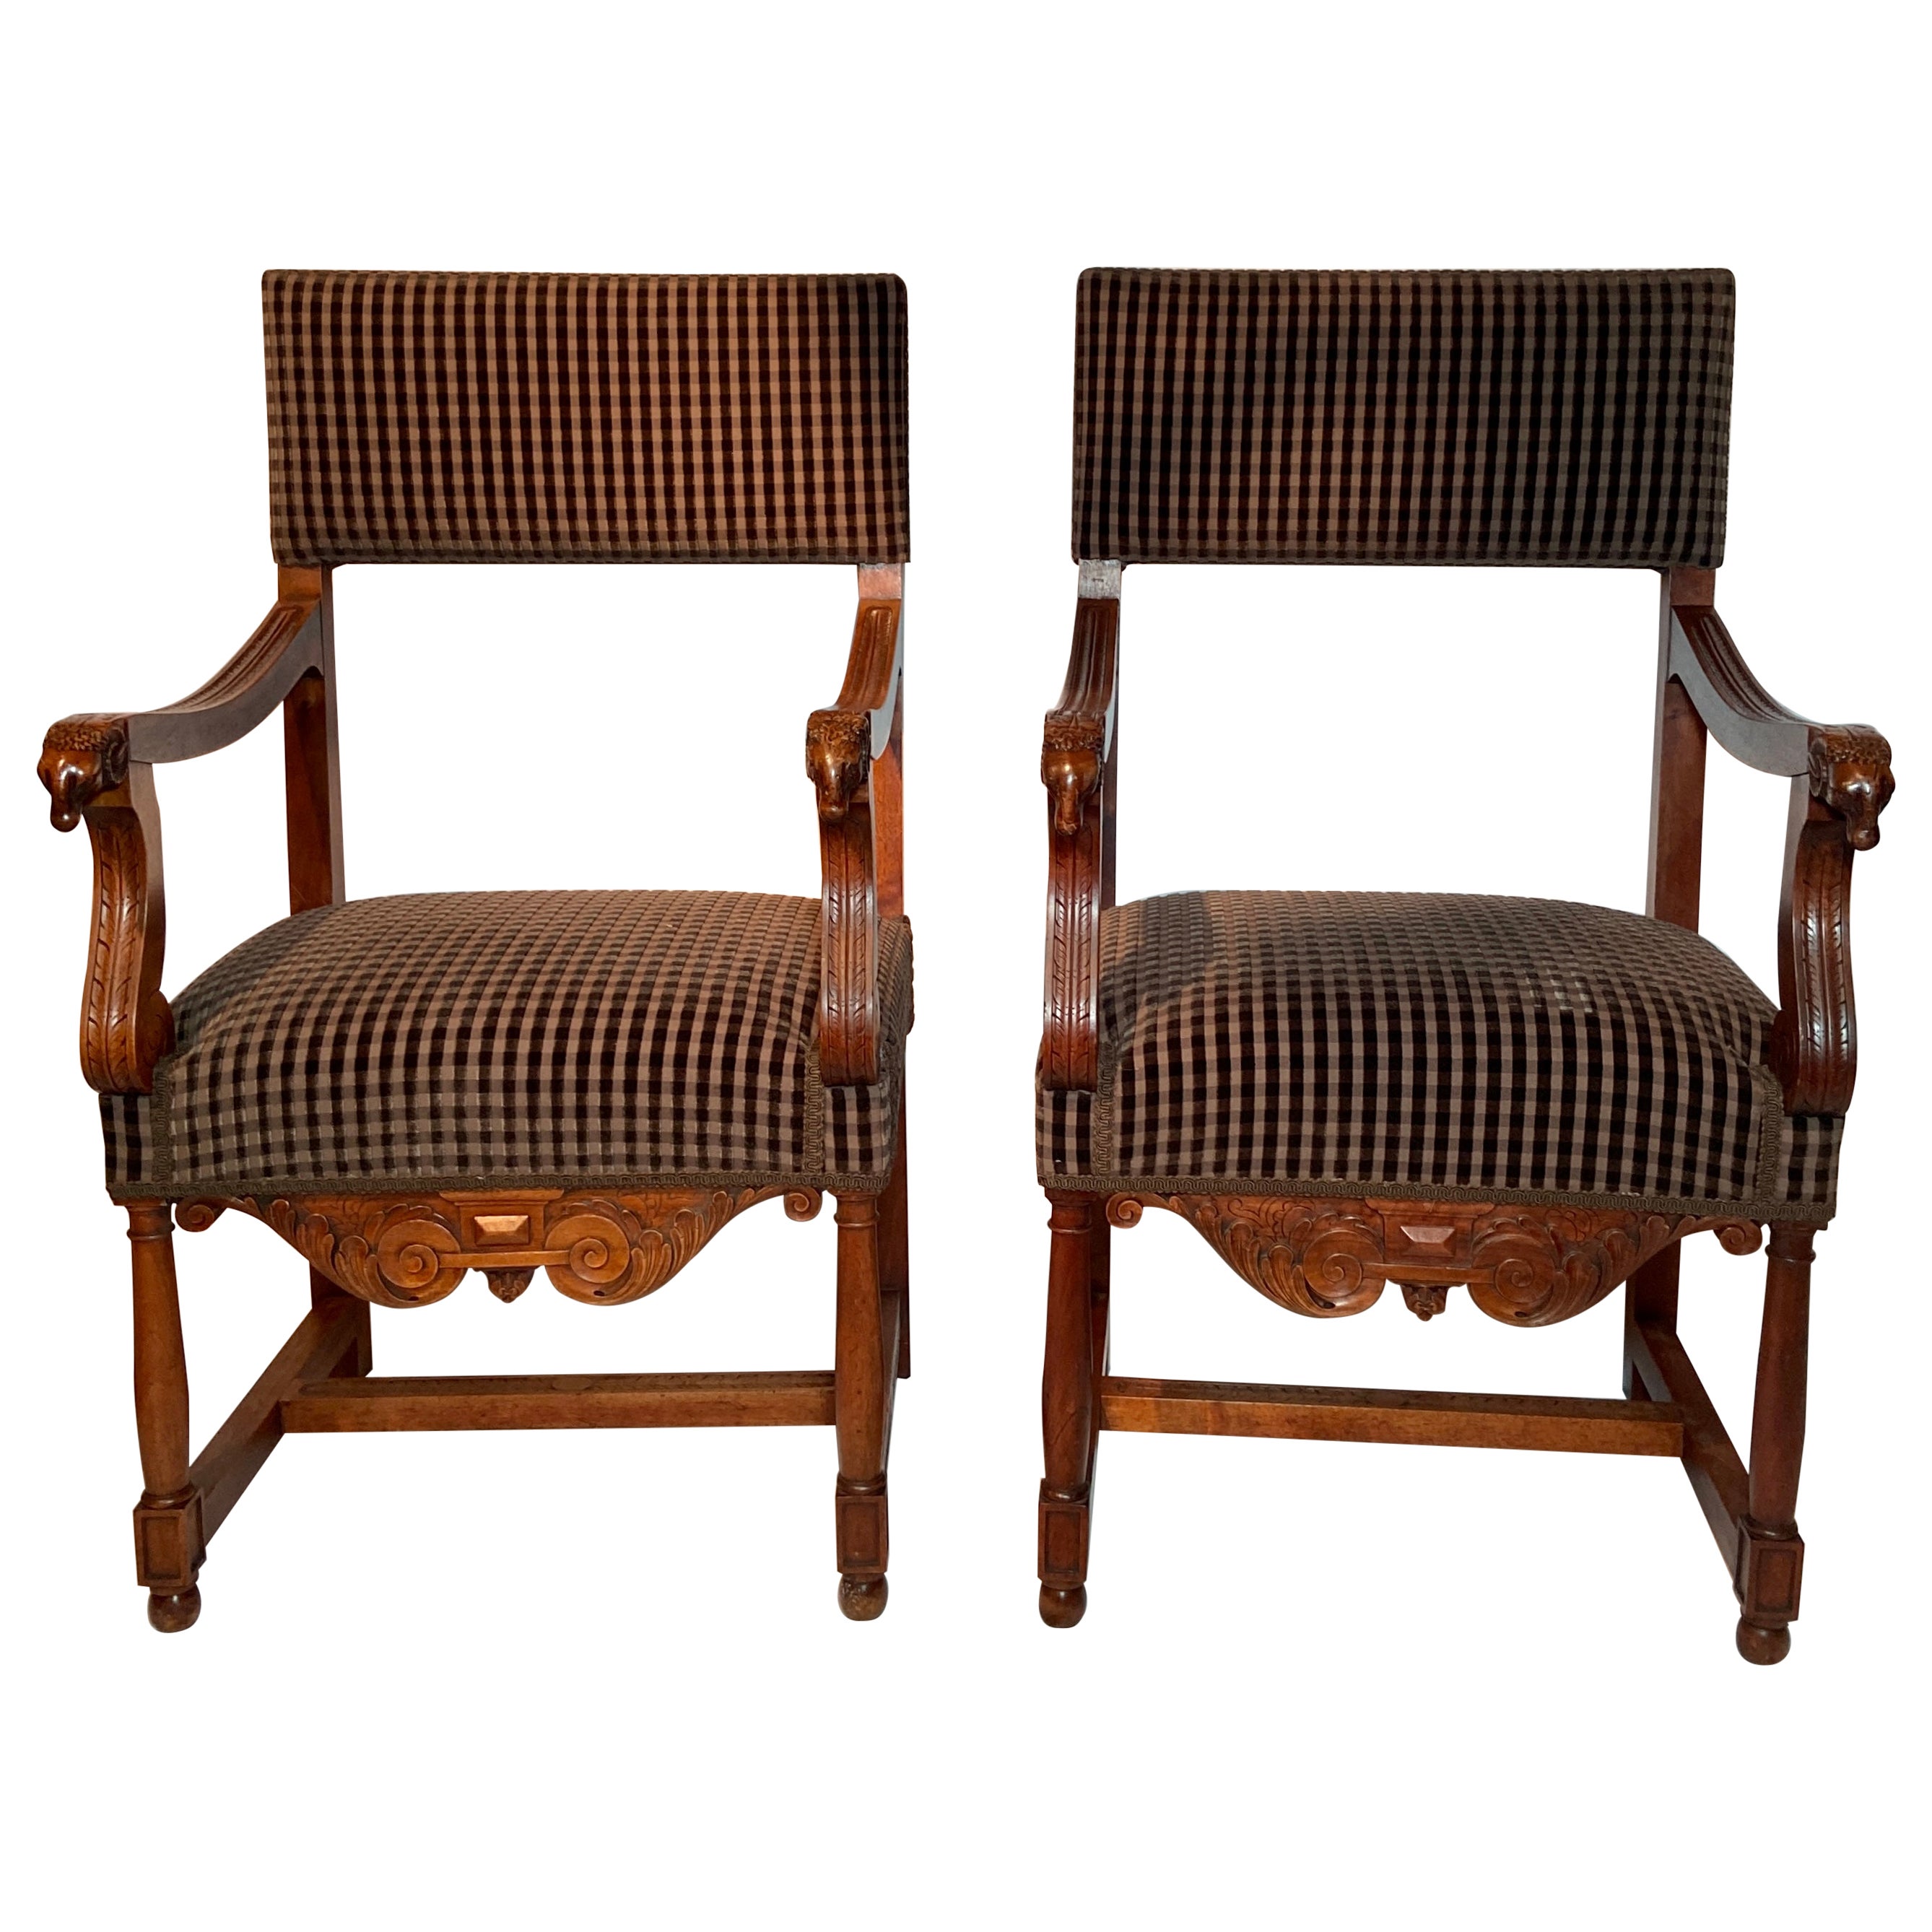 Pair Antique French Country Carved Walnut Arm Chairs, circa 1800s